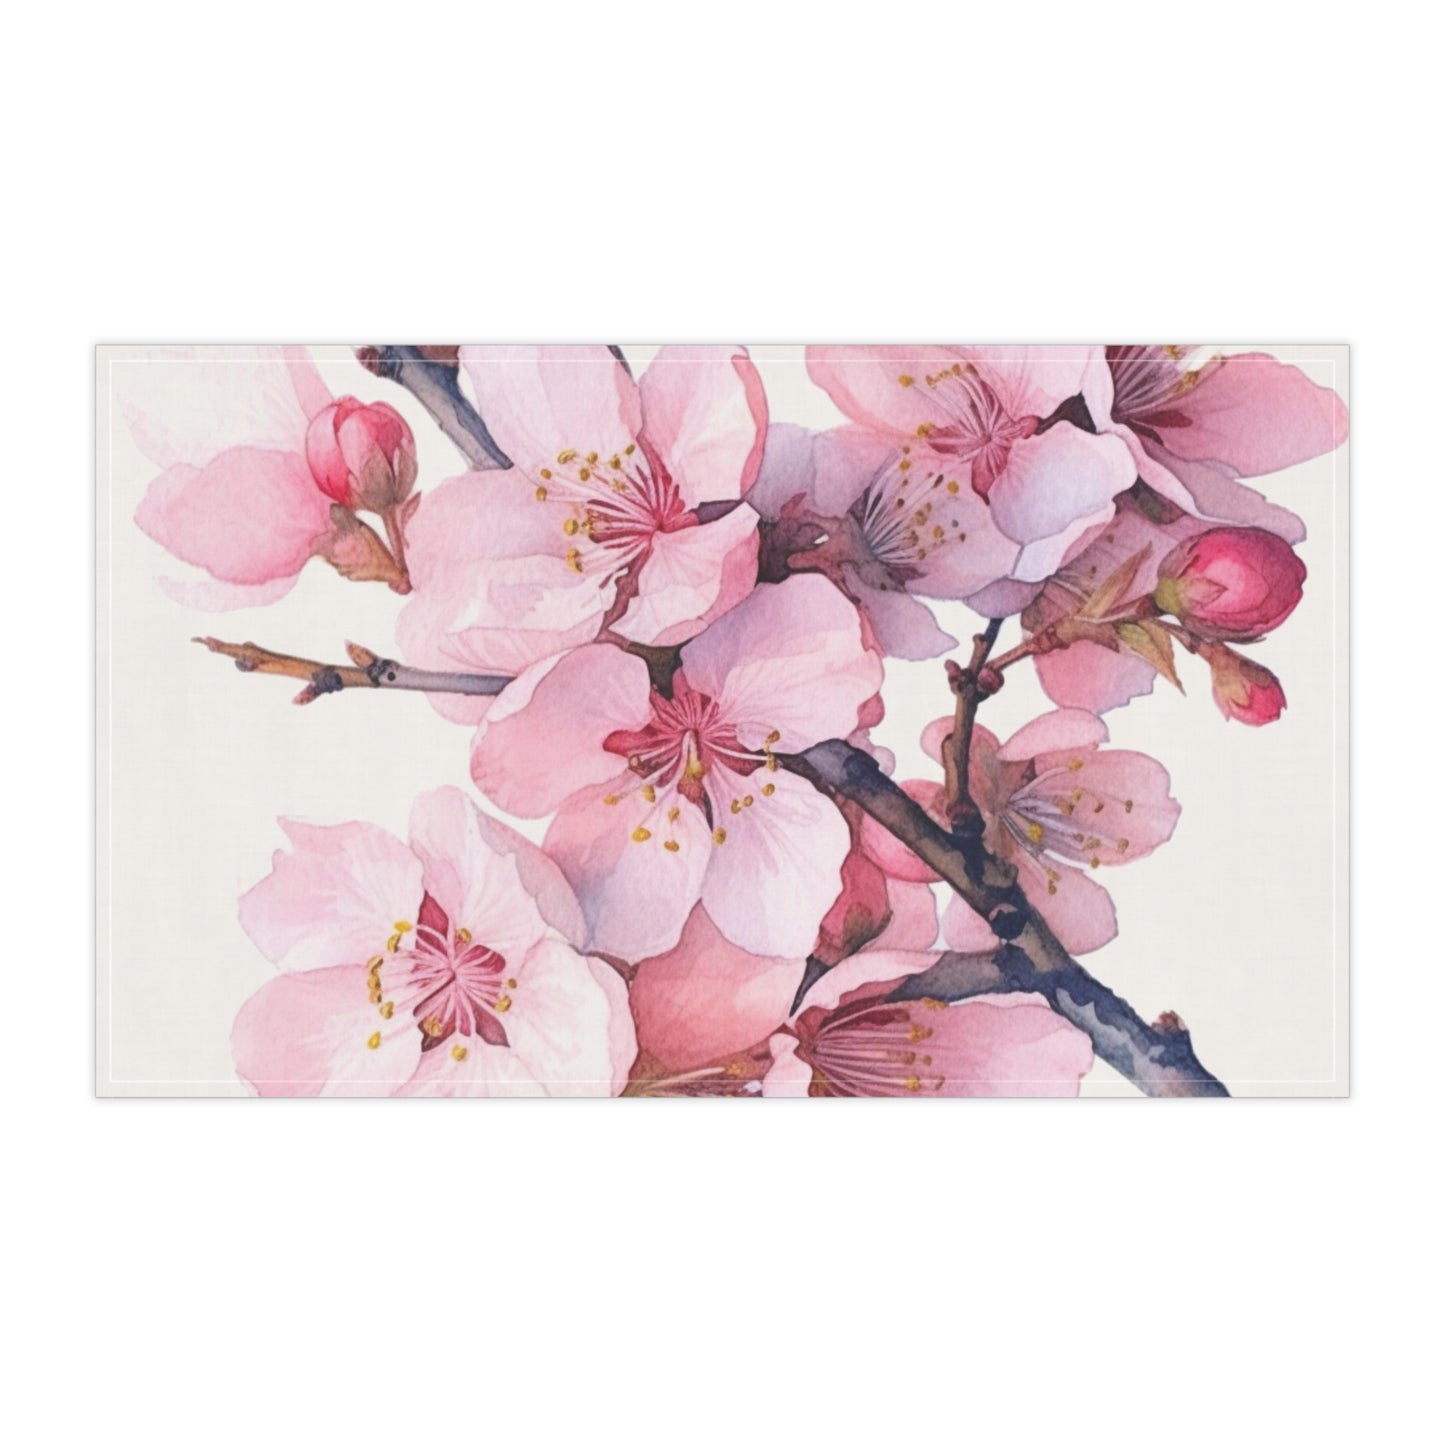 Whimsical Delight: Watercolor Cherry Blossom Tree Kitchen Towel